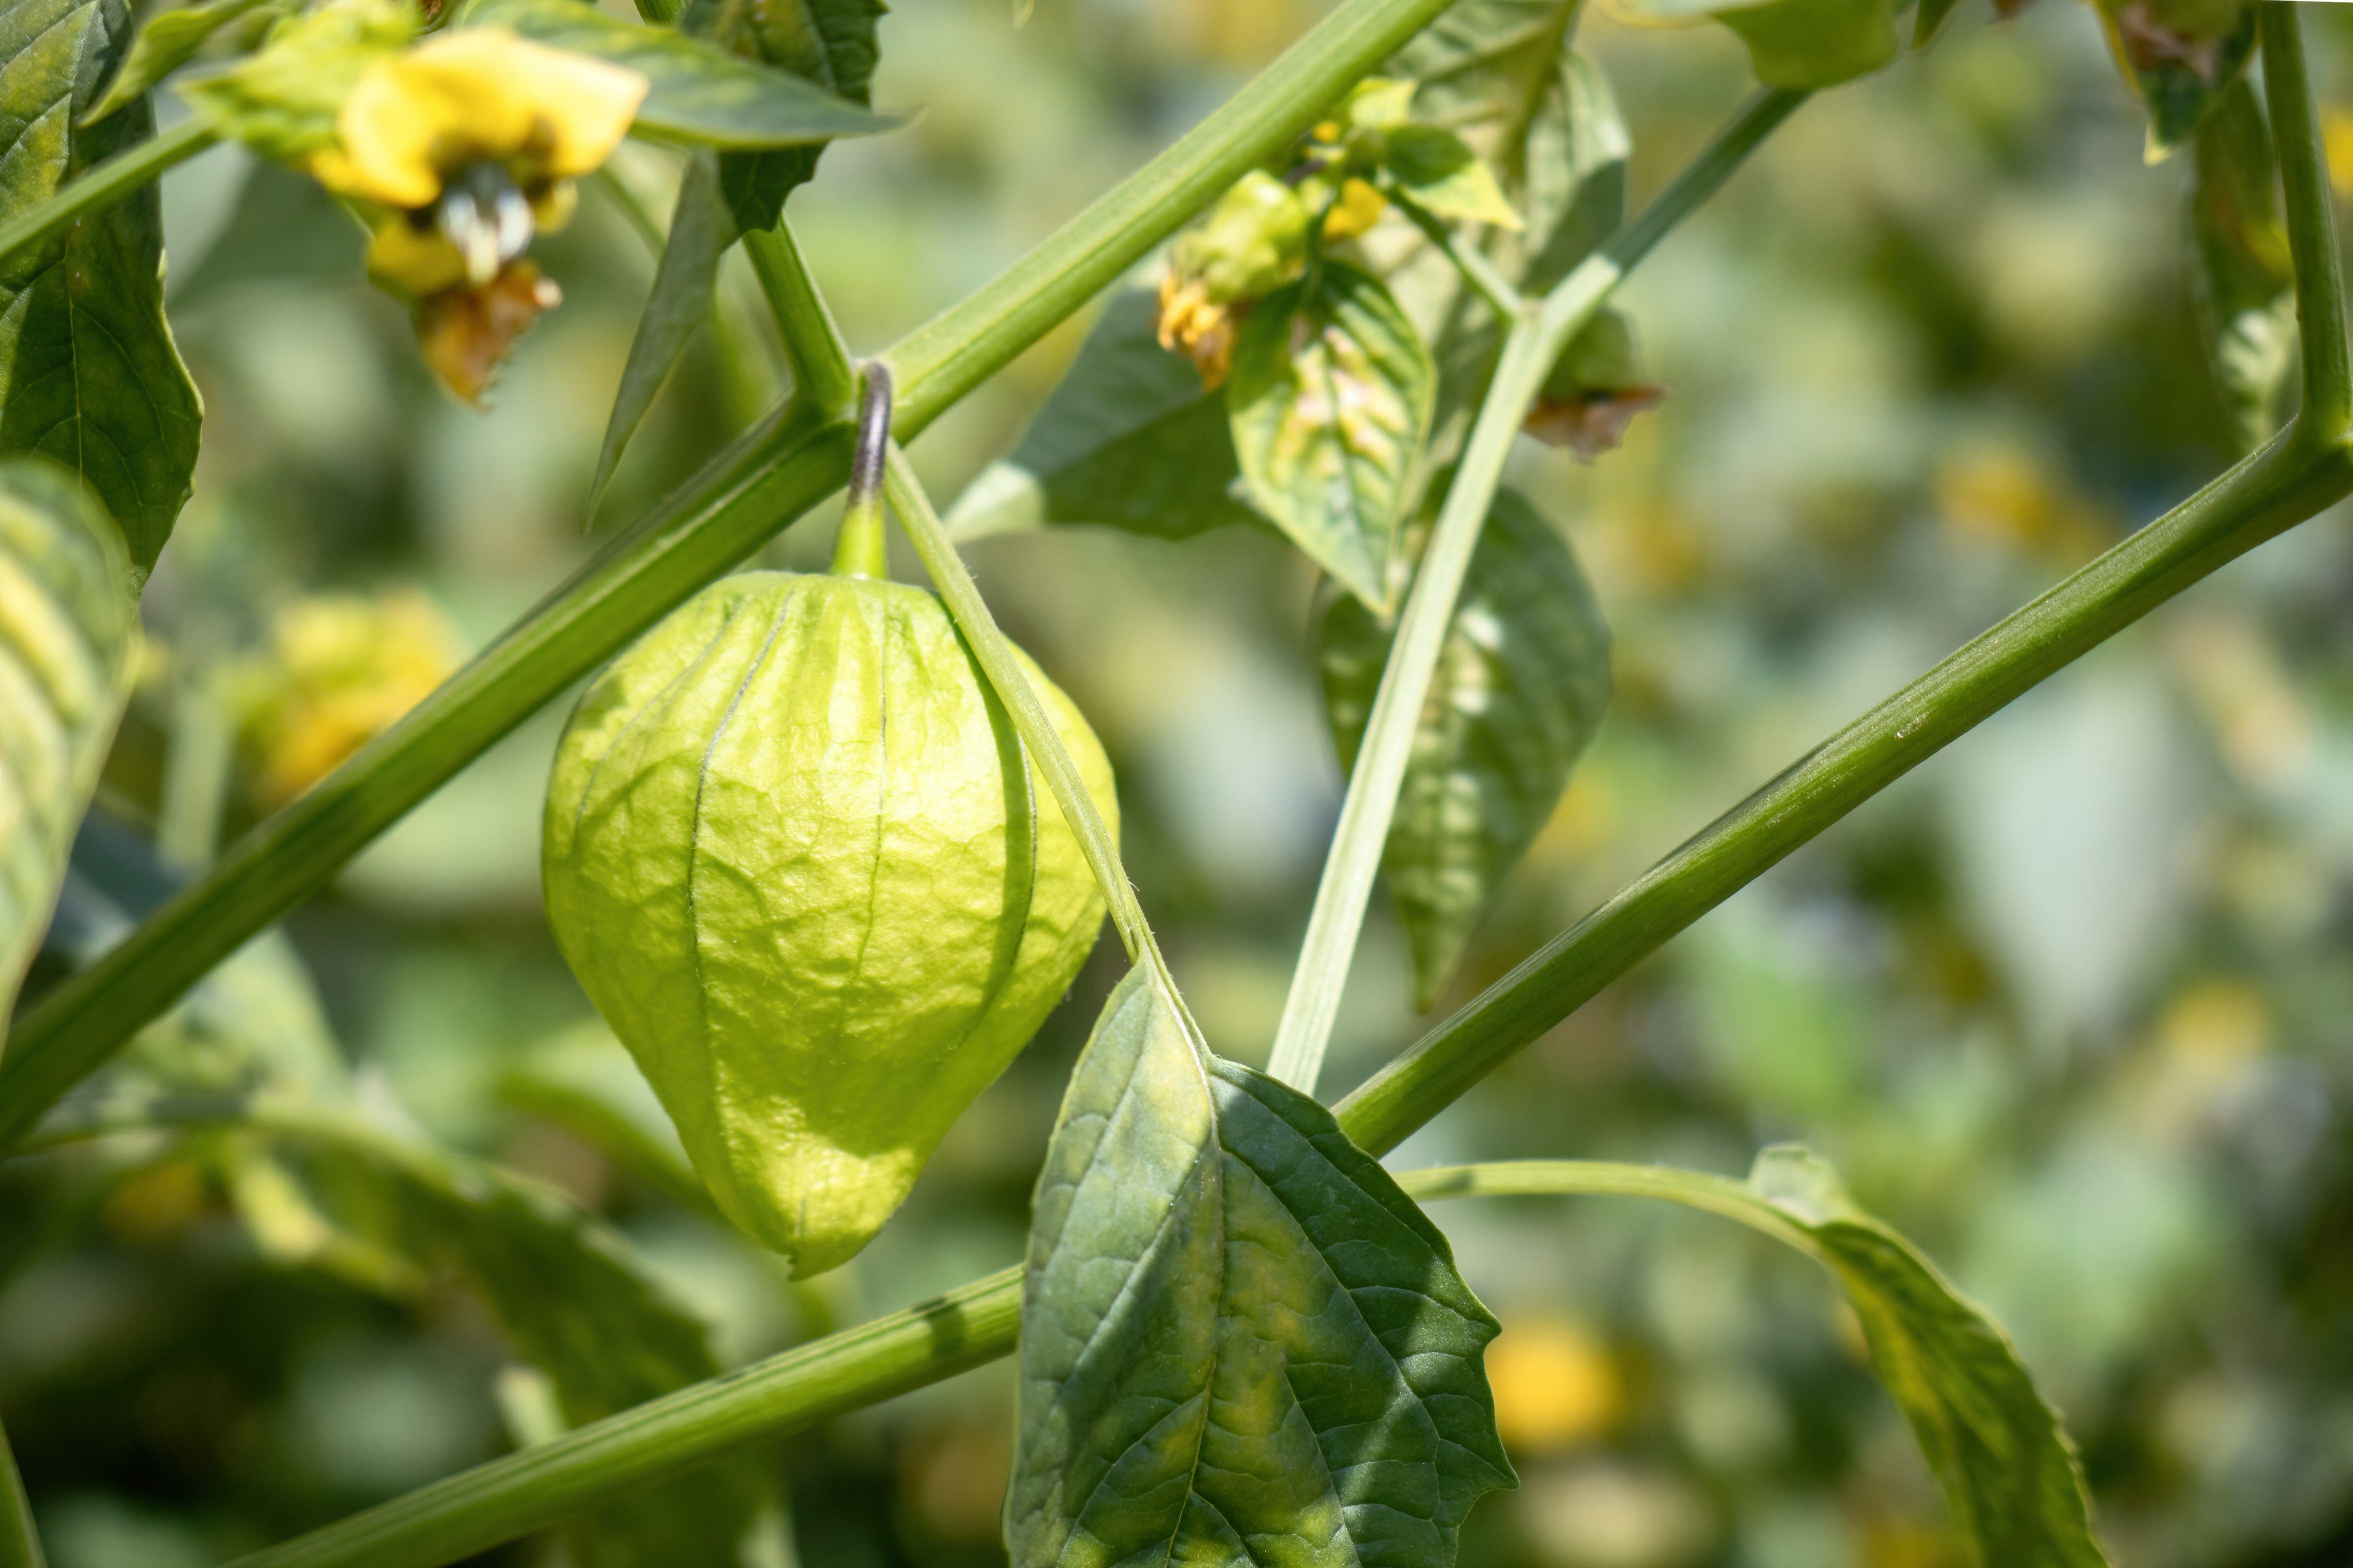 A tomatillo plant with flowers and tomatillos